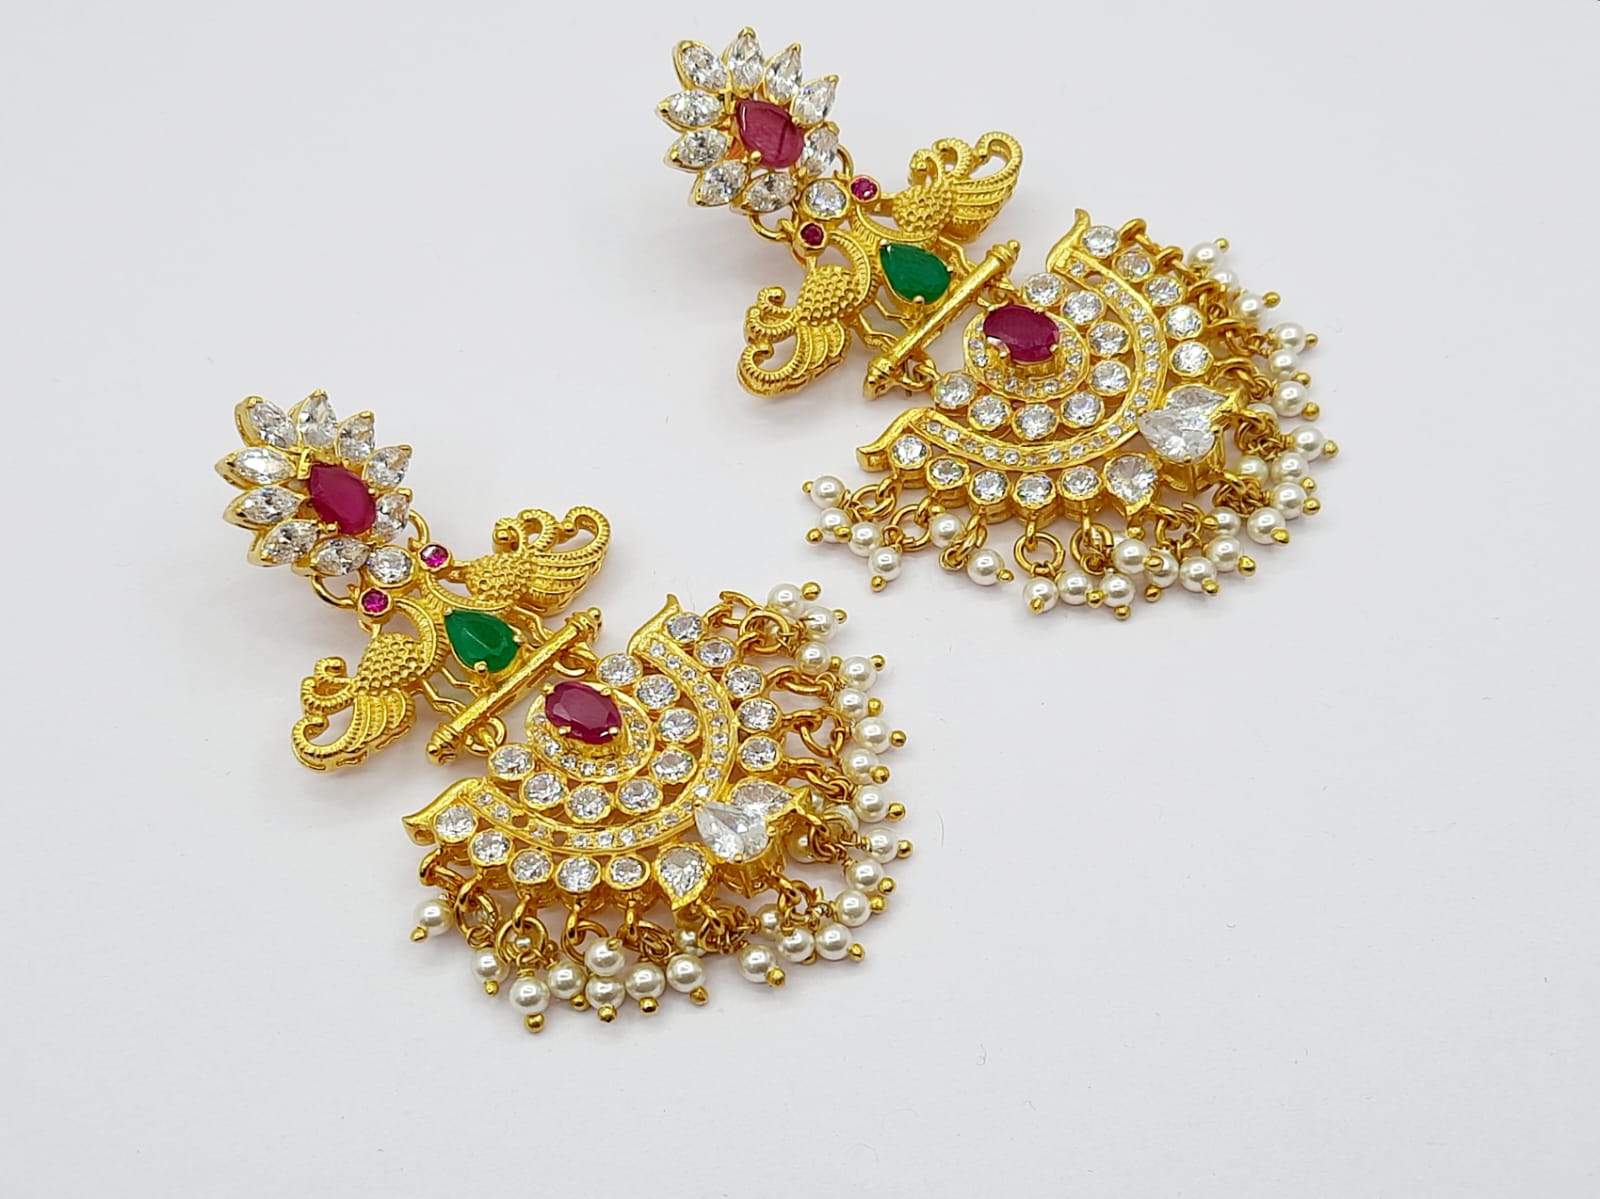 22k Gold Stylish Earrings Designs To Buy Now | South Indian Jewels